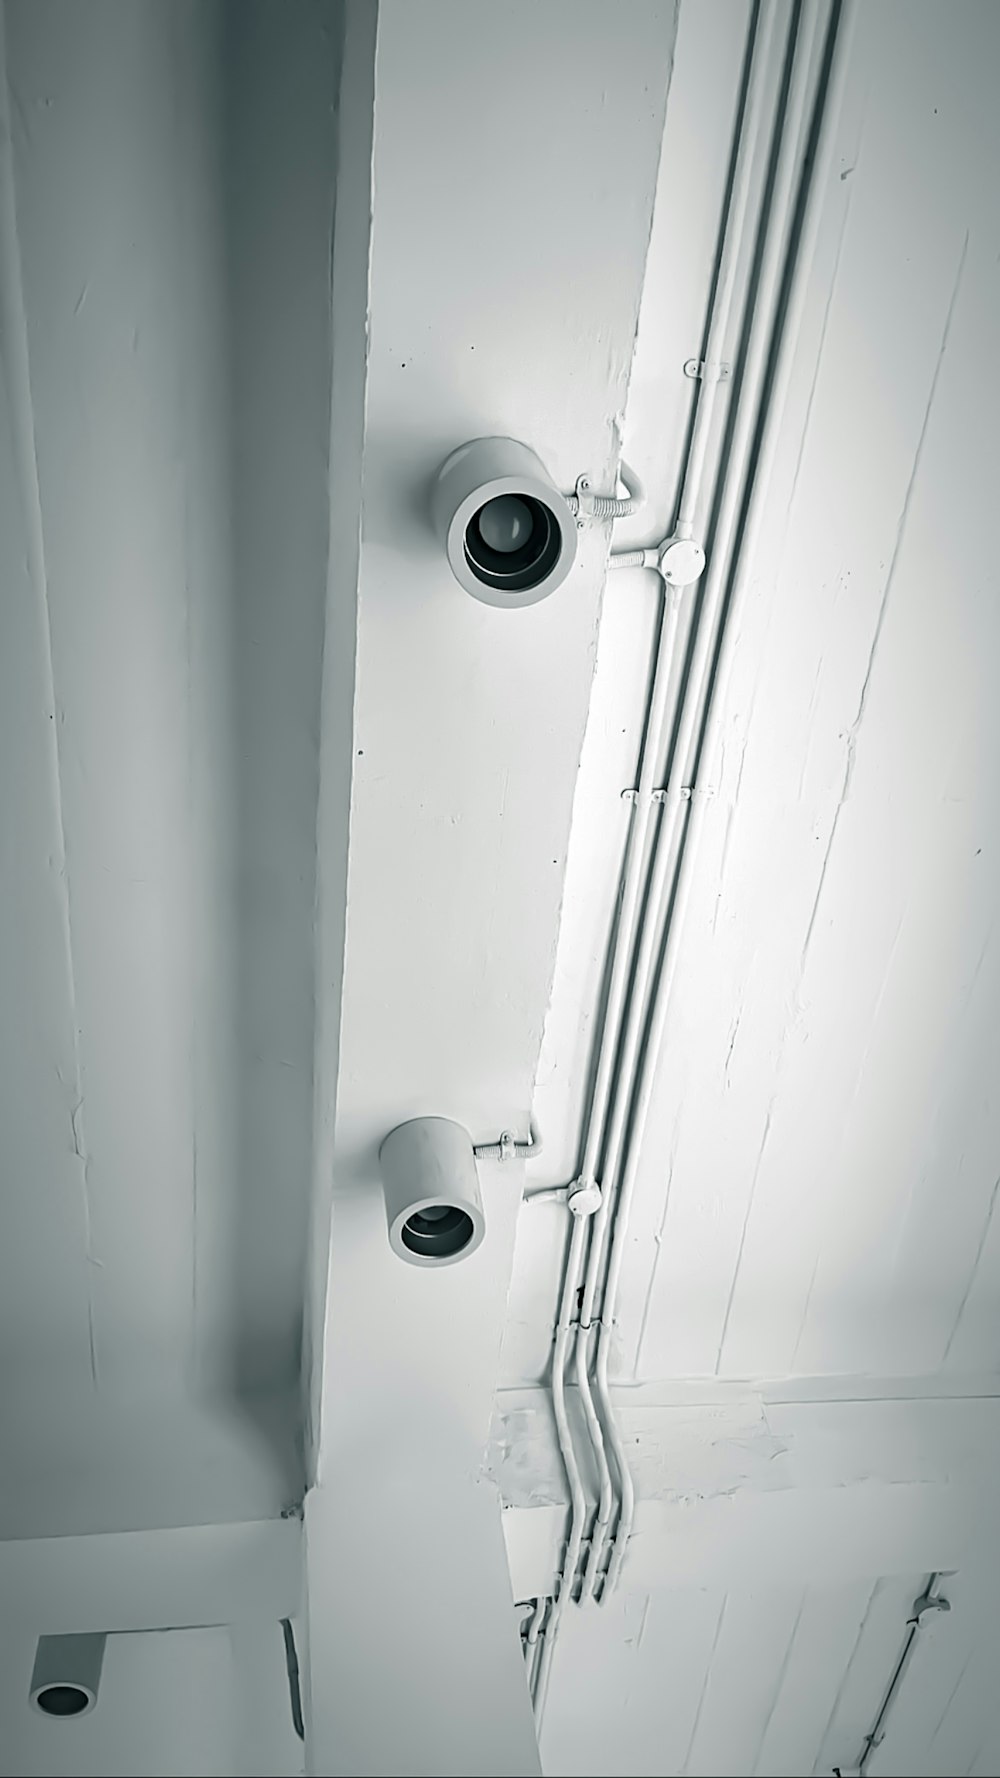 two security cameras mounted to the side of a wall